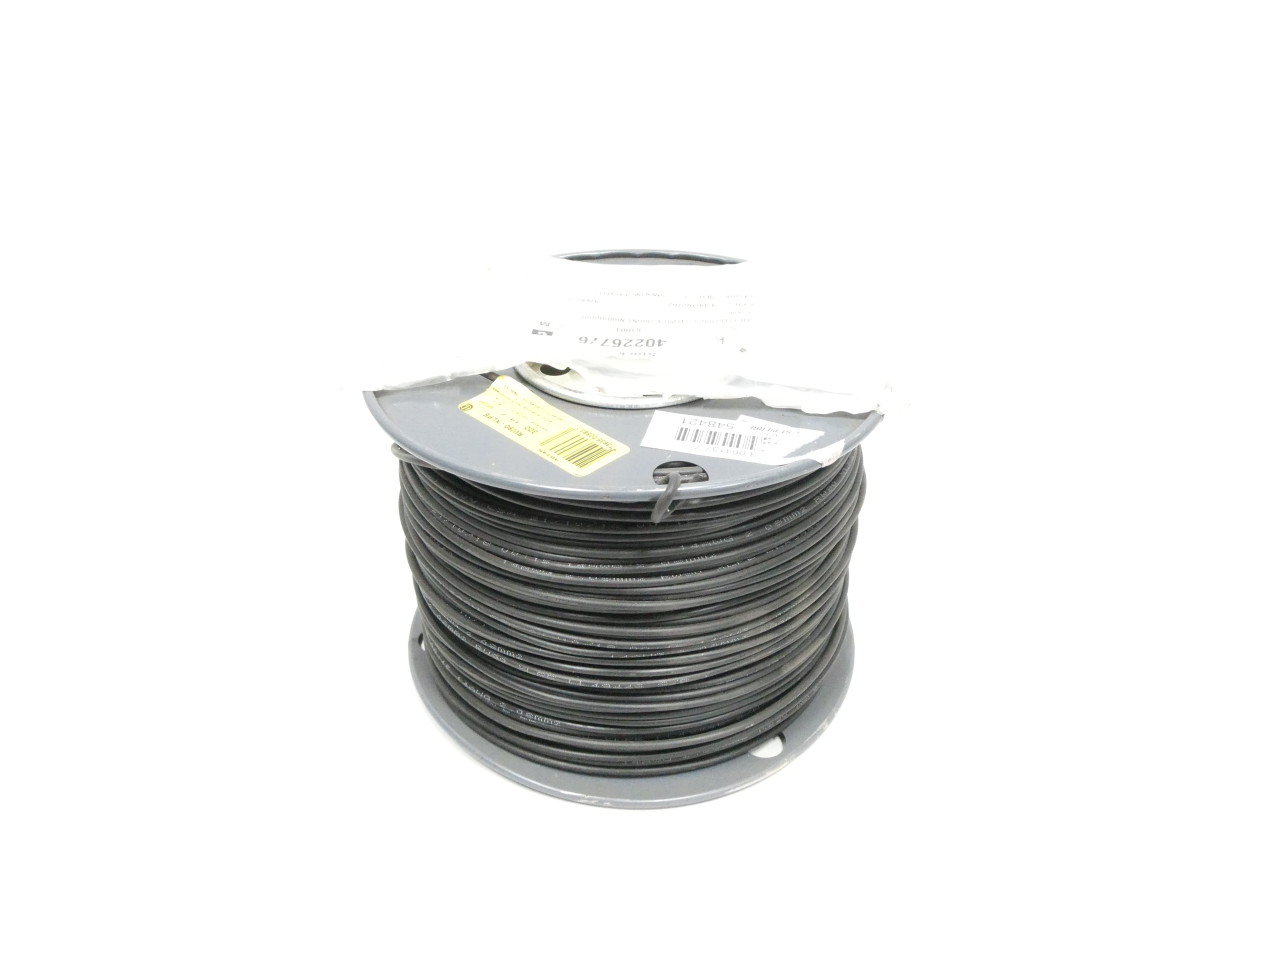 C2064A WHITE Prysmian Group, Cables, Wires